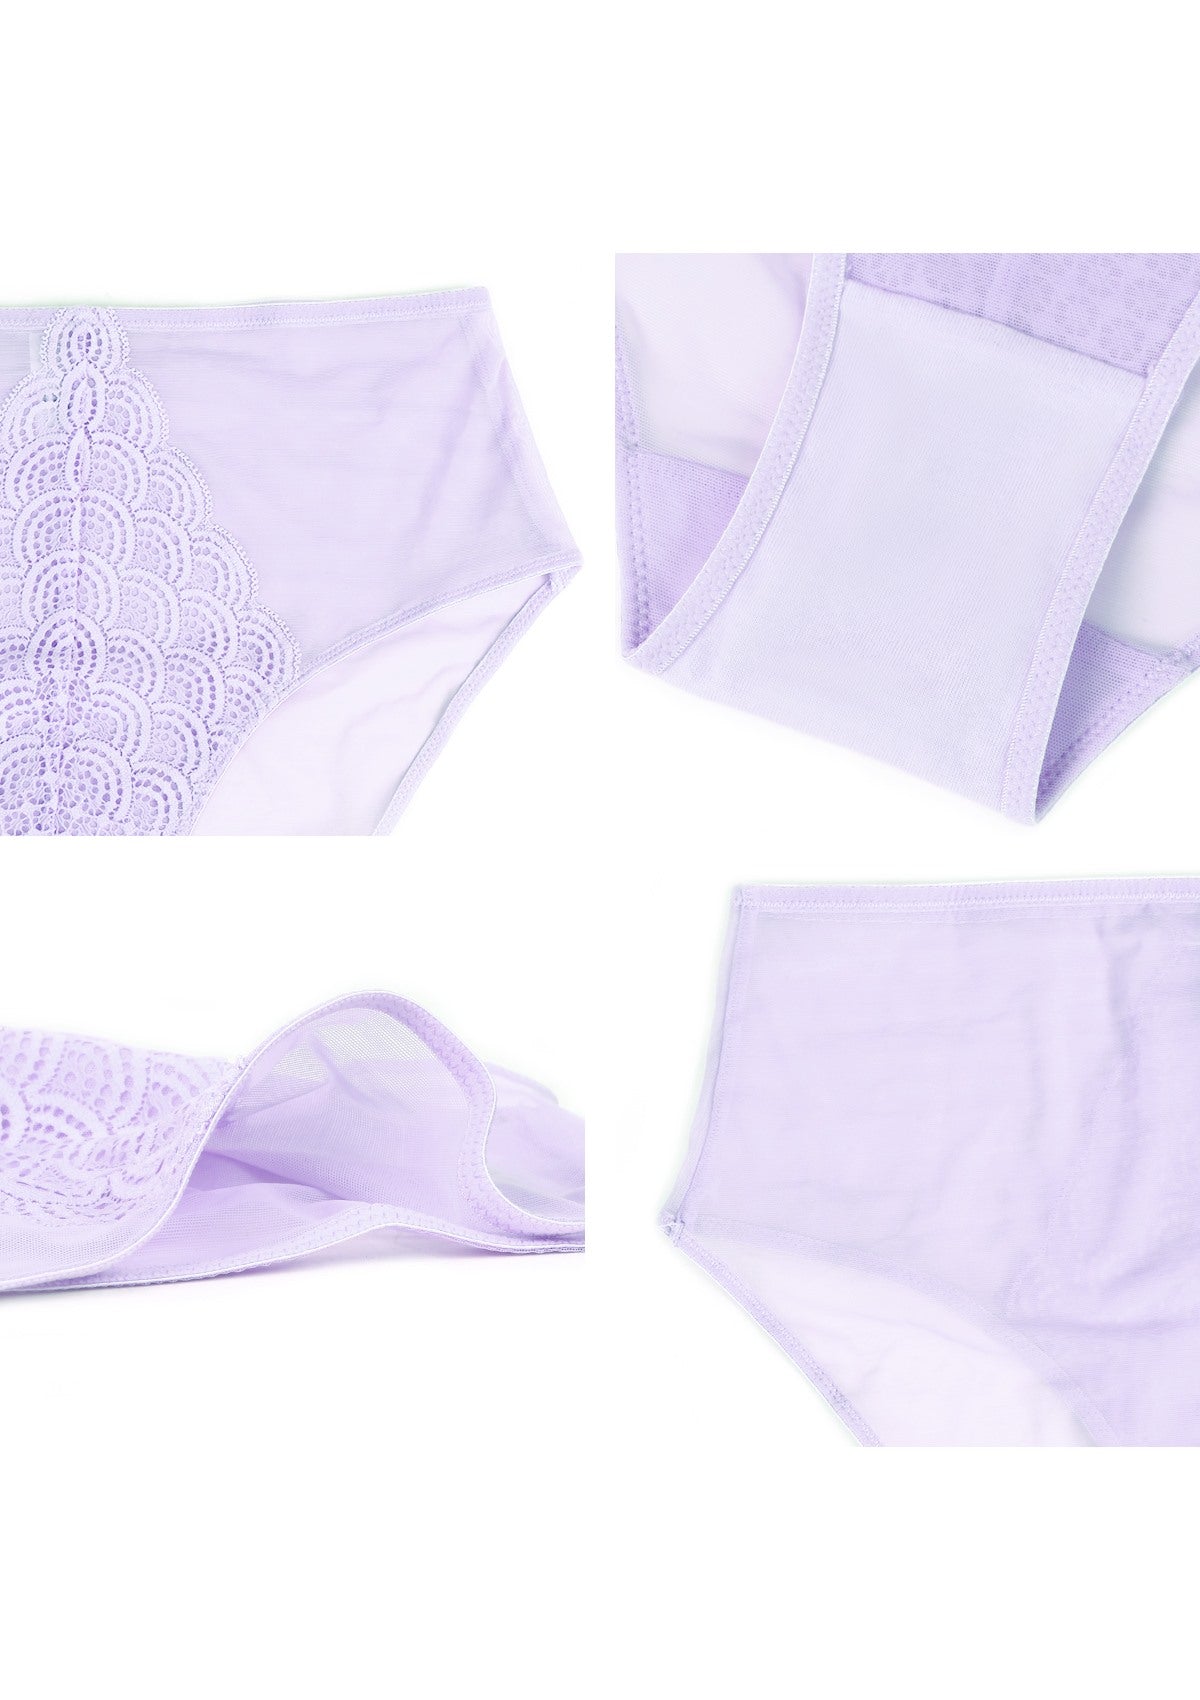 HSIA Spring Romance High-Rise Floral Lacy Panty-Comfort In Style - XXL / Light Purple